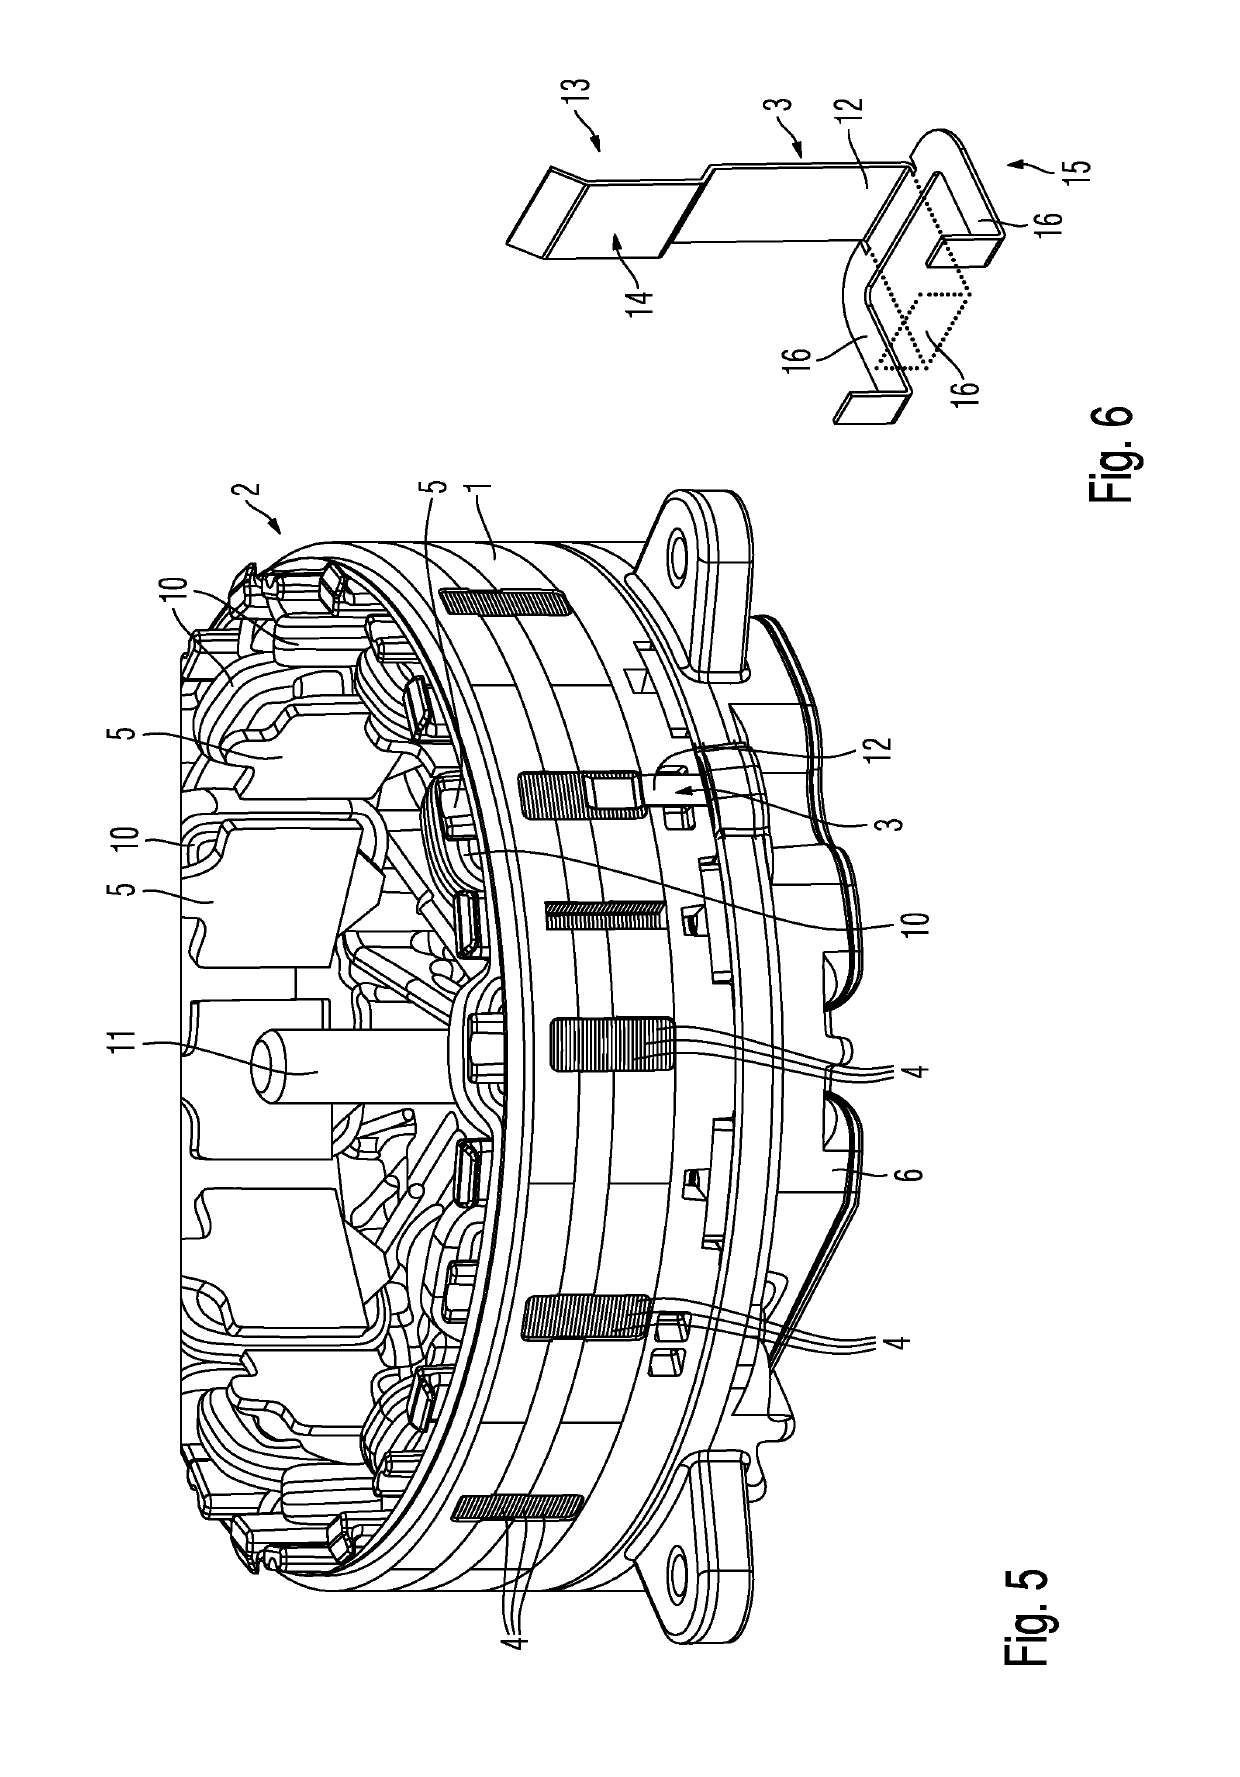 Electric motor and radiator fan module comprising an electric motor of this type